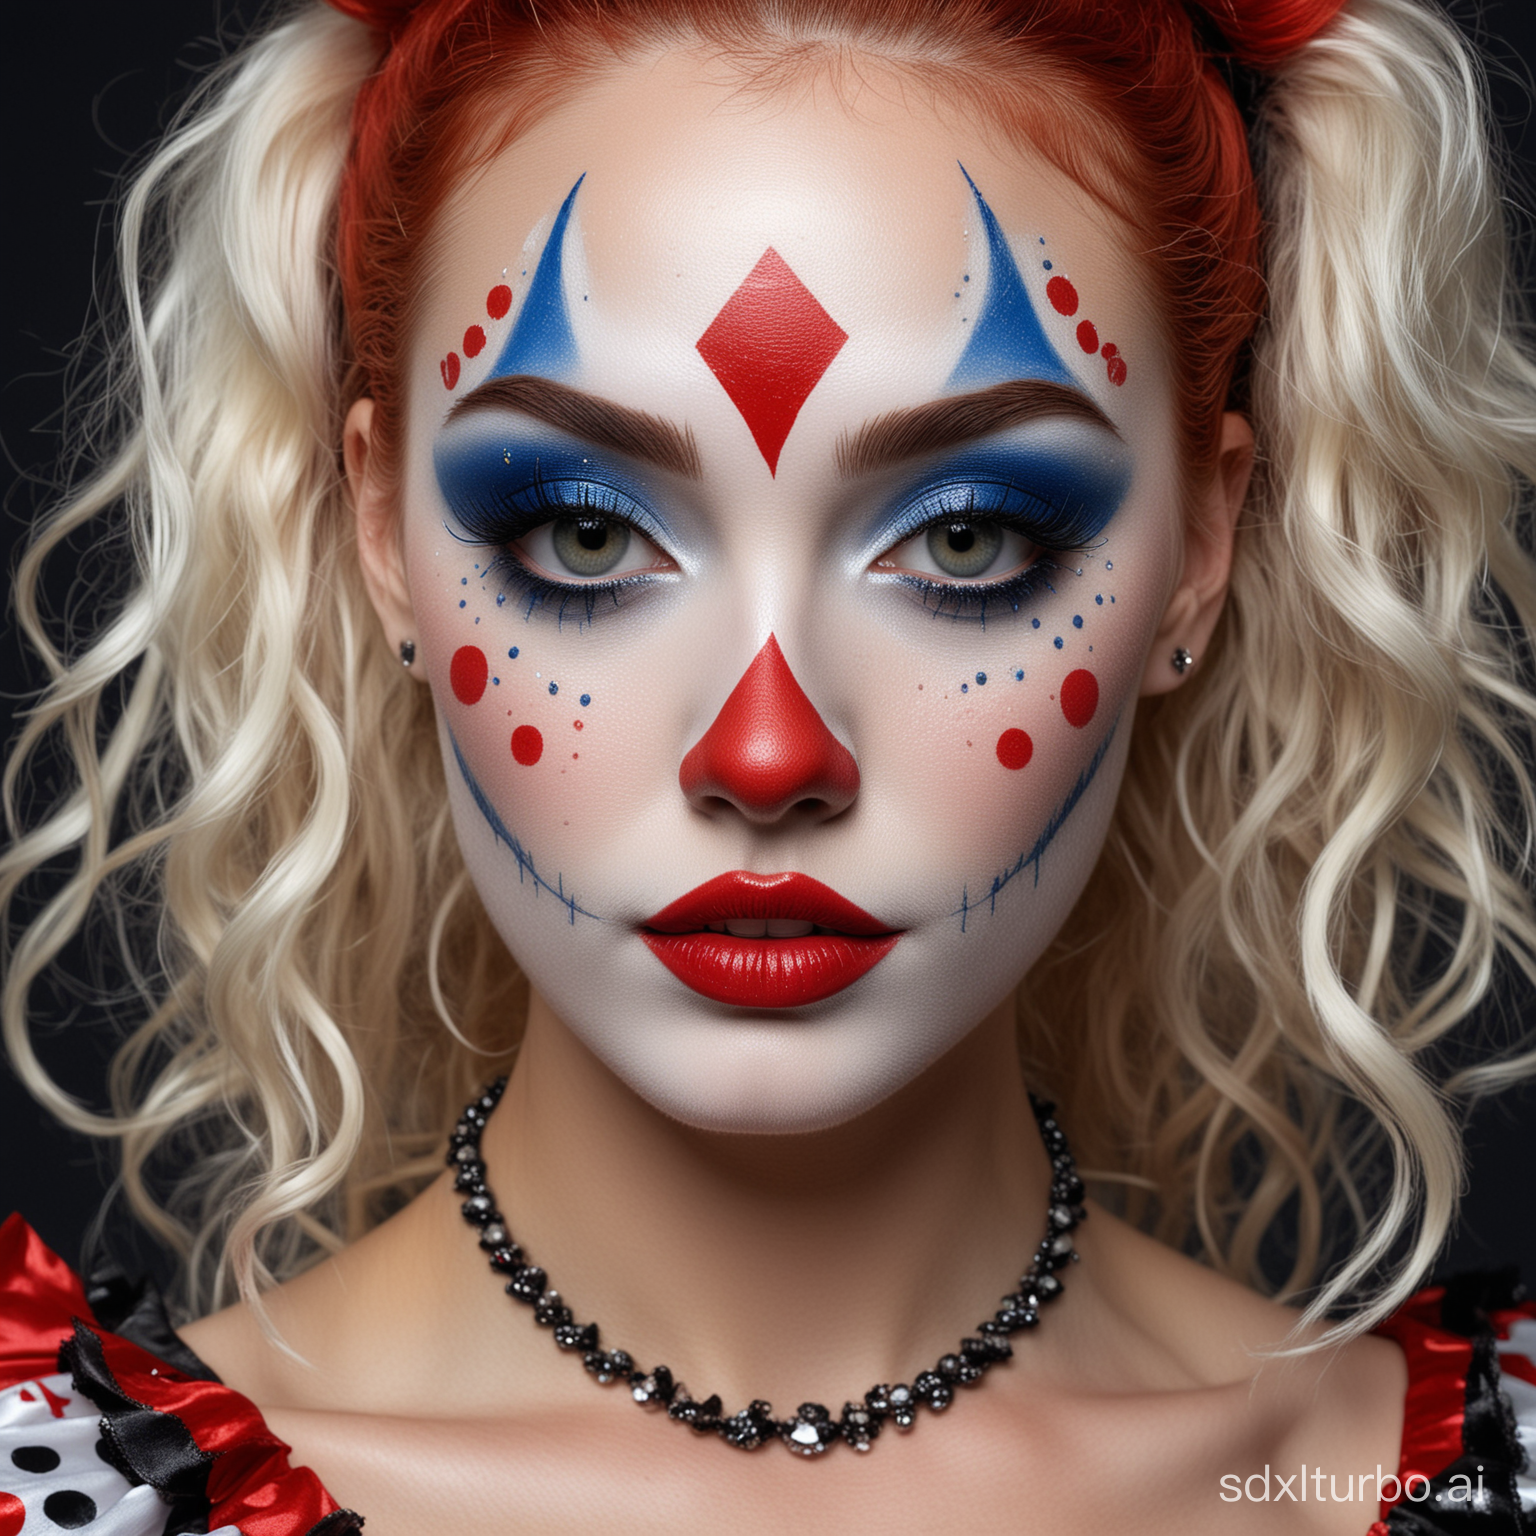 Photo of a Beautiful woman with professionally applied exotic clown make-up. Her face is painted smooth bright white with elongated red and black harlequin designs, Her eyes are evocative, deep blue with exaggerated long white eyelashes, The tip of her nose accented with a red dot, her lips have been drawn in miniature with red paint, her natural hair is vivid red, wavy and carefree, her makeup is flawless, mysterious, --no freckles --chaos 10 --ar 3:4 --style raw --stylize 200